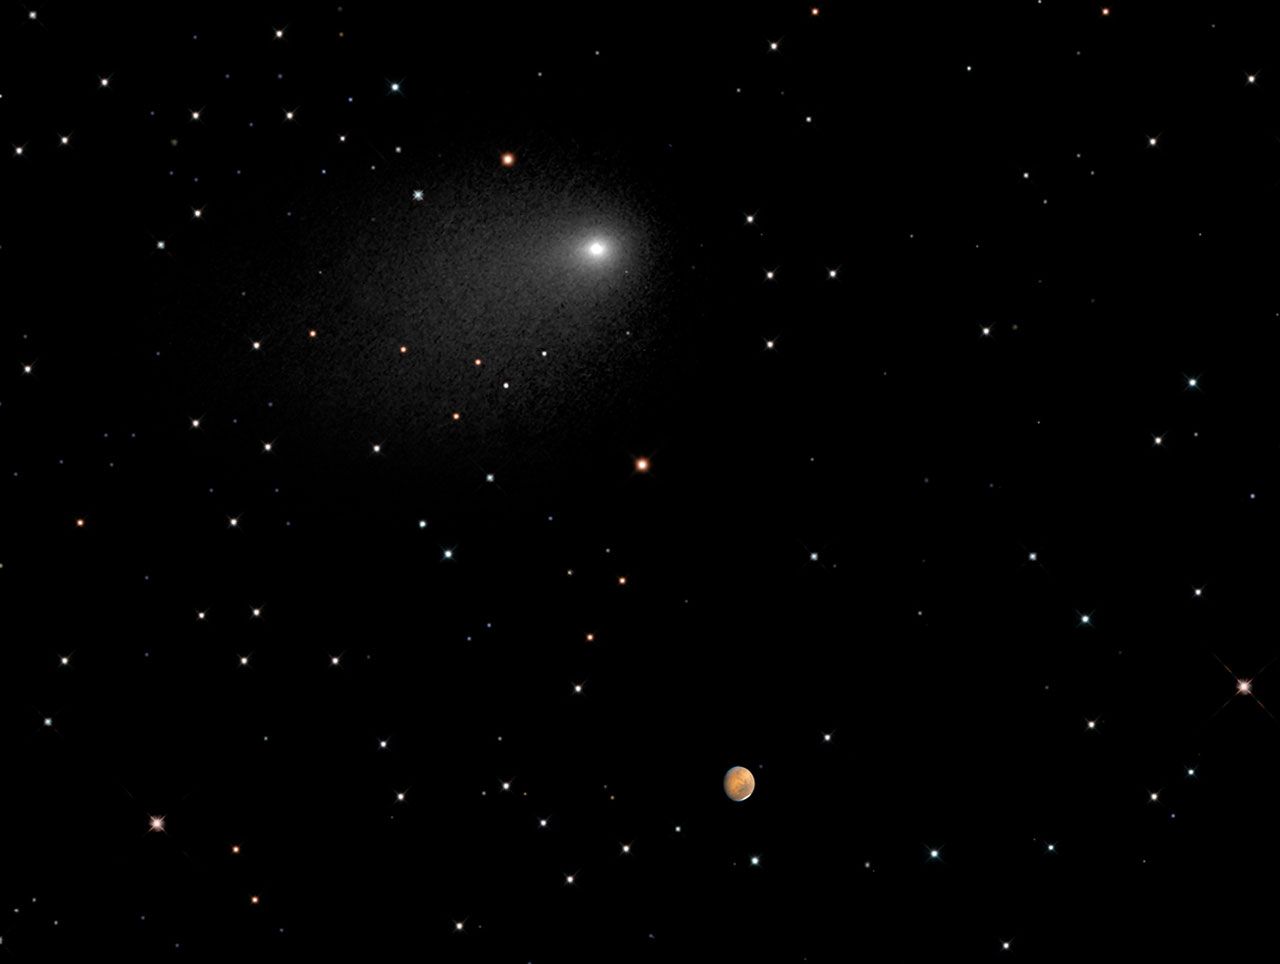 Comet and Mars close together against a backdrop of stars.